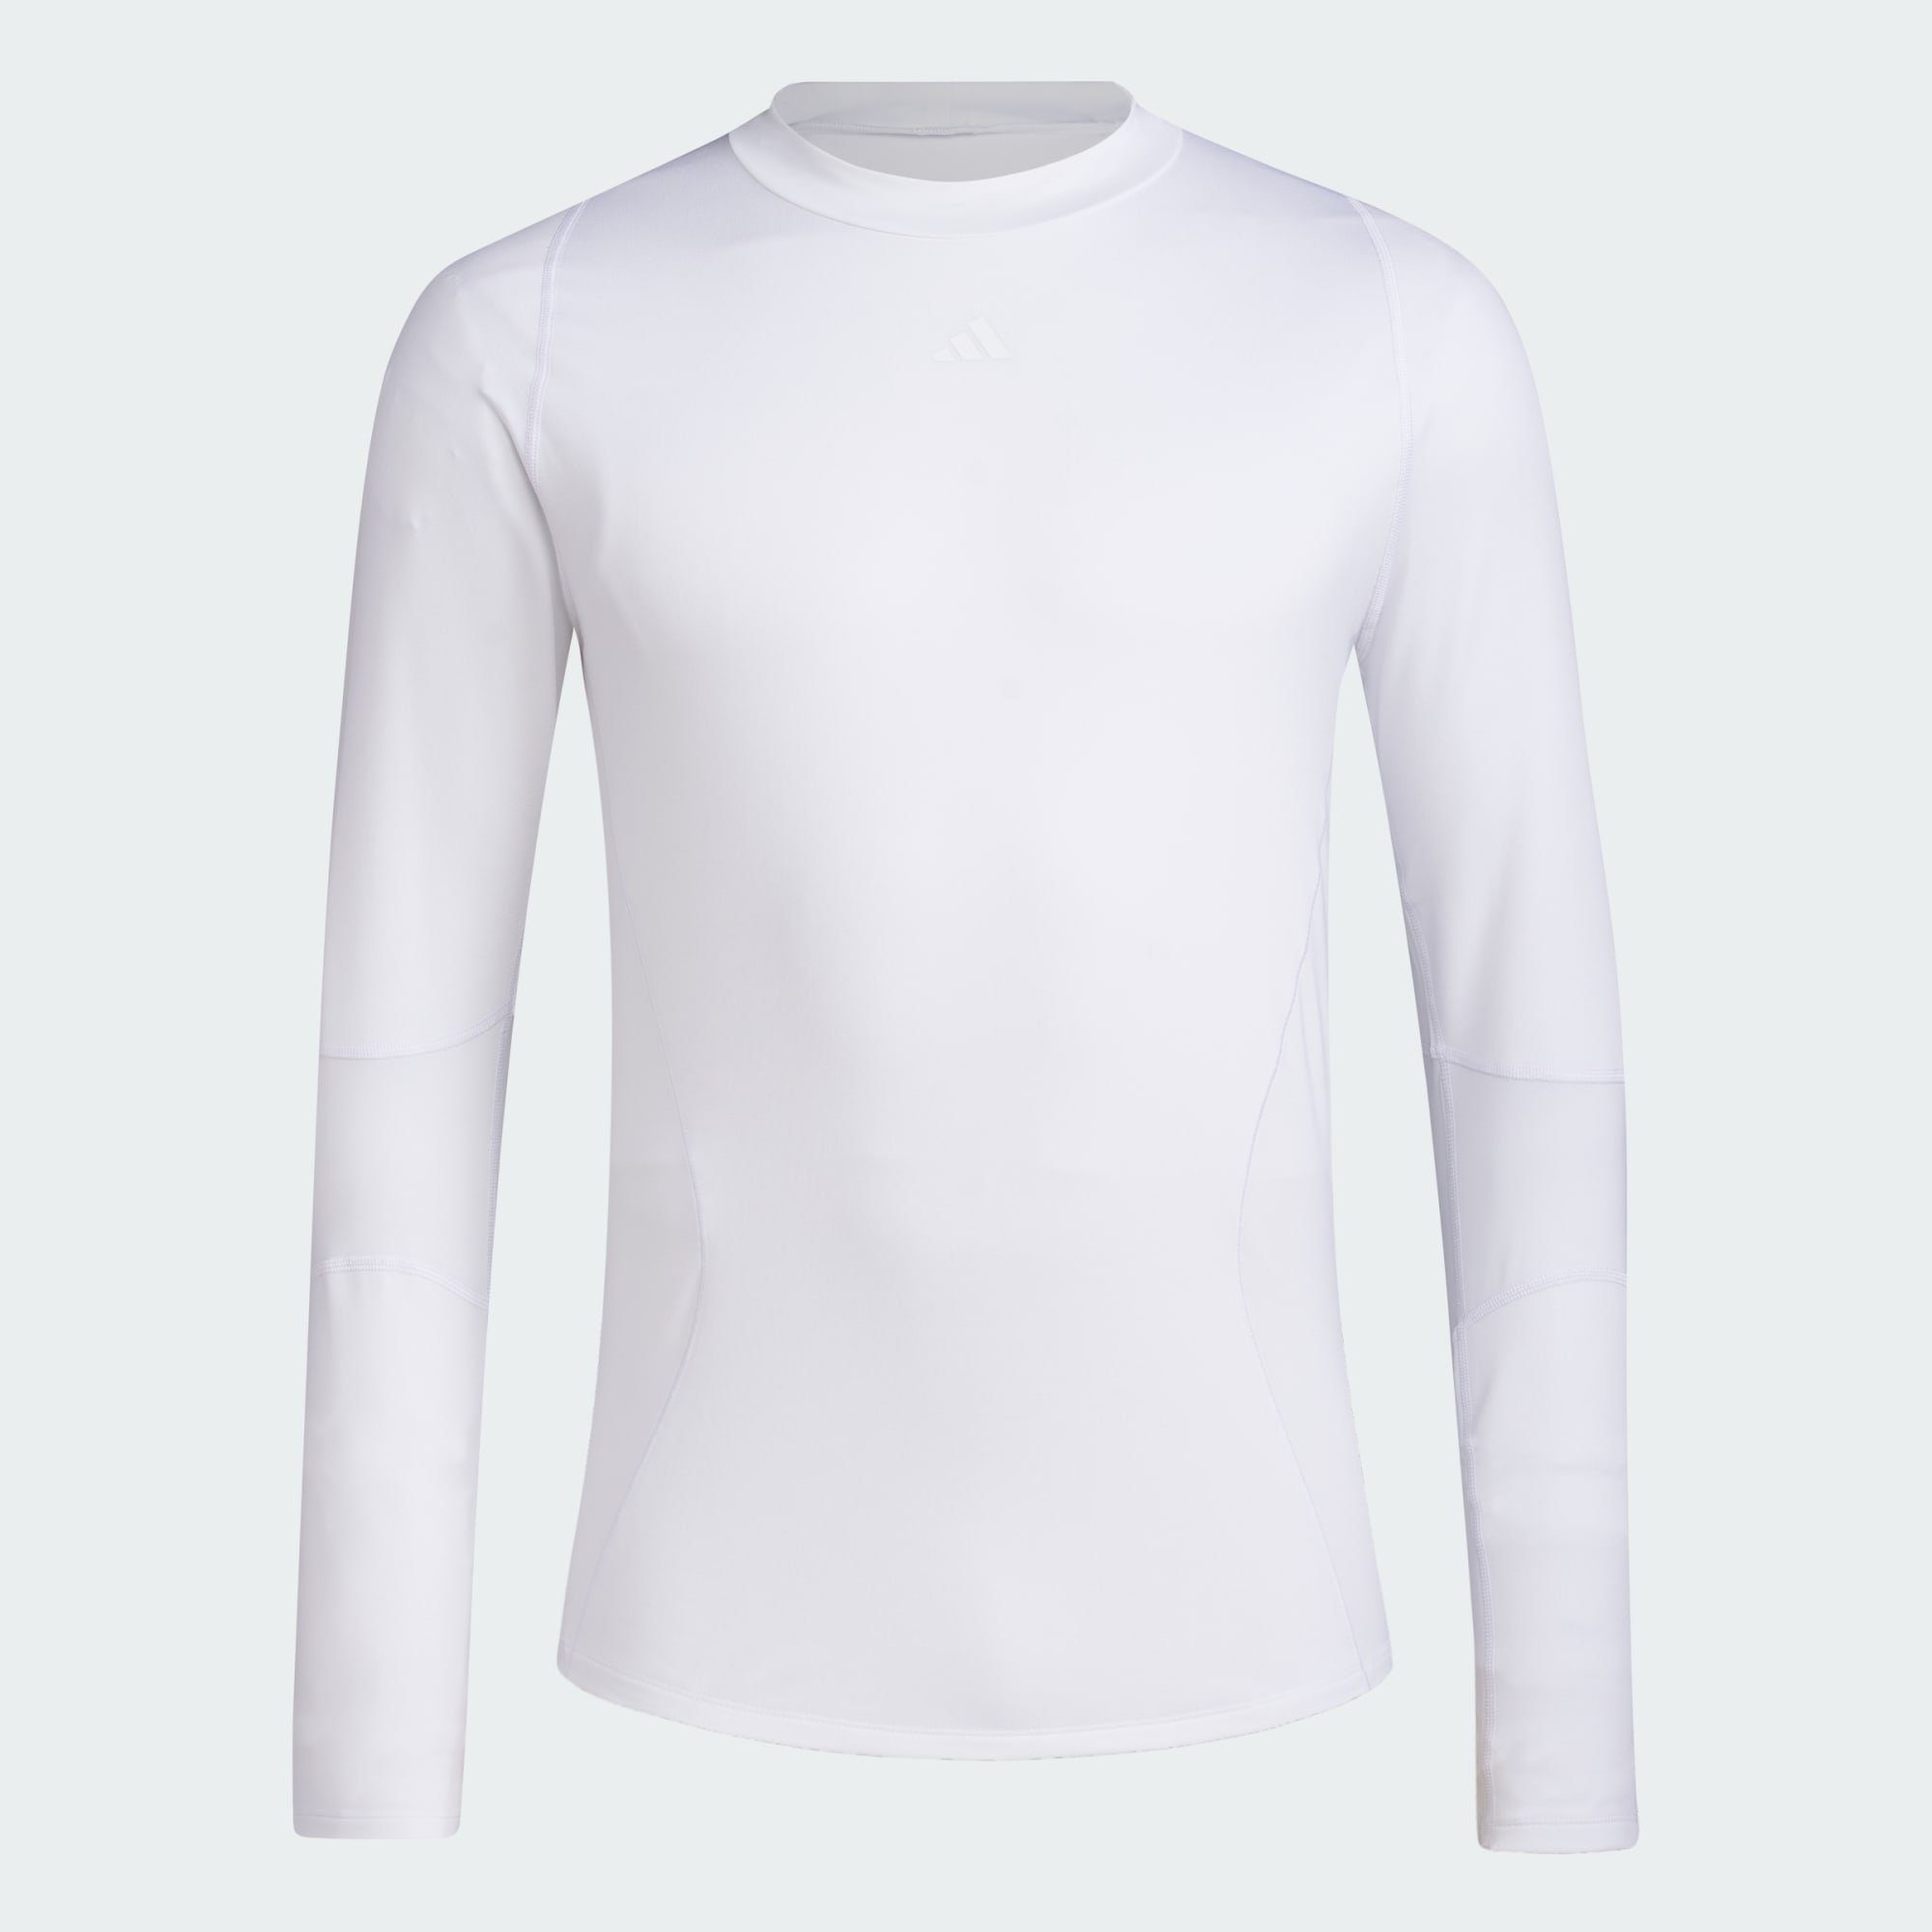 LONGSLEEVE White Performance TECHFIT Funktionsshirt COLD.RDY adidas